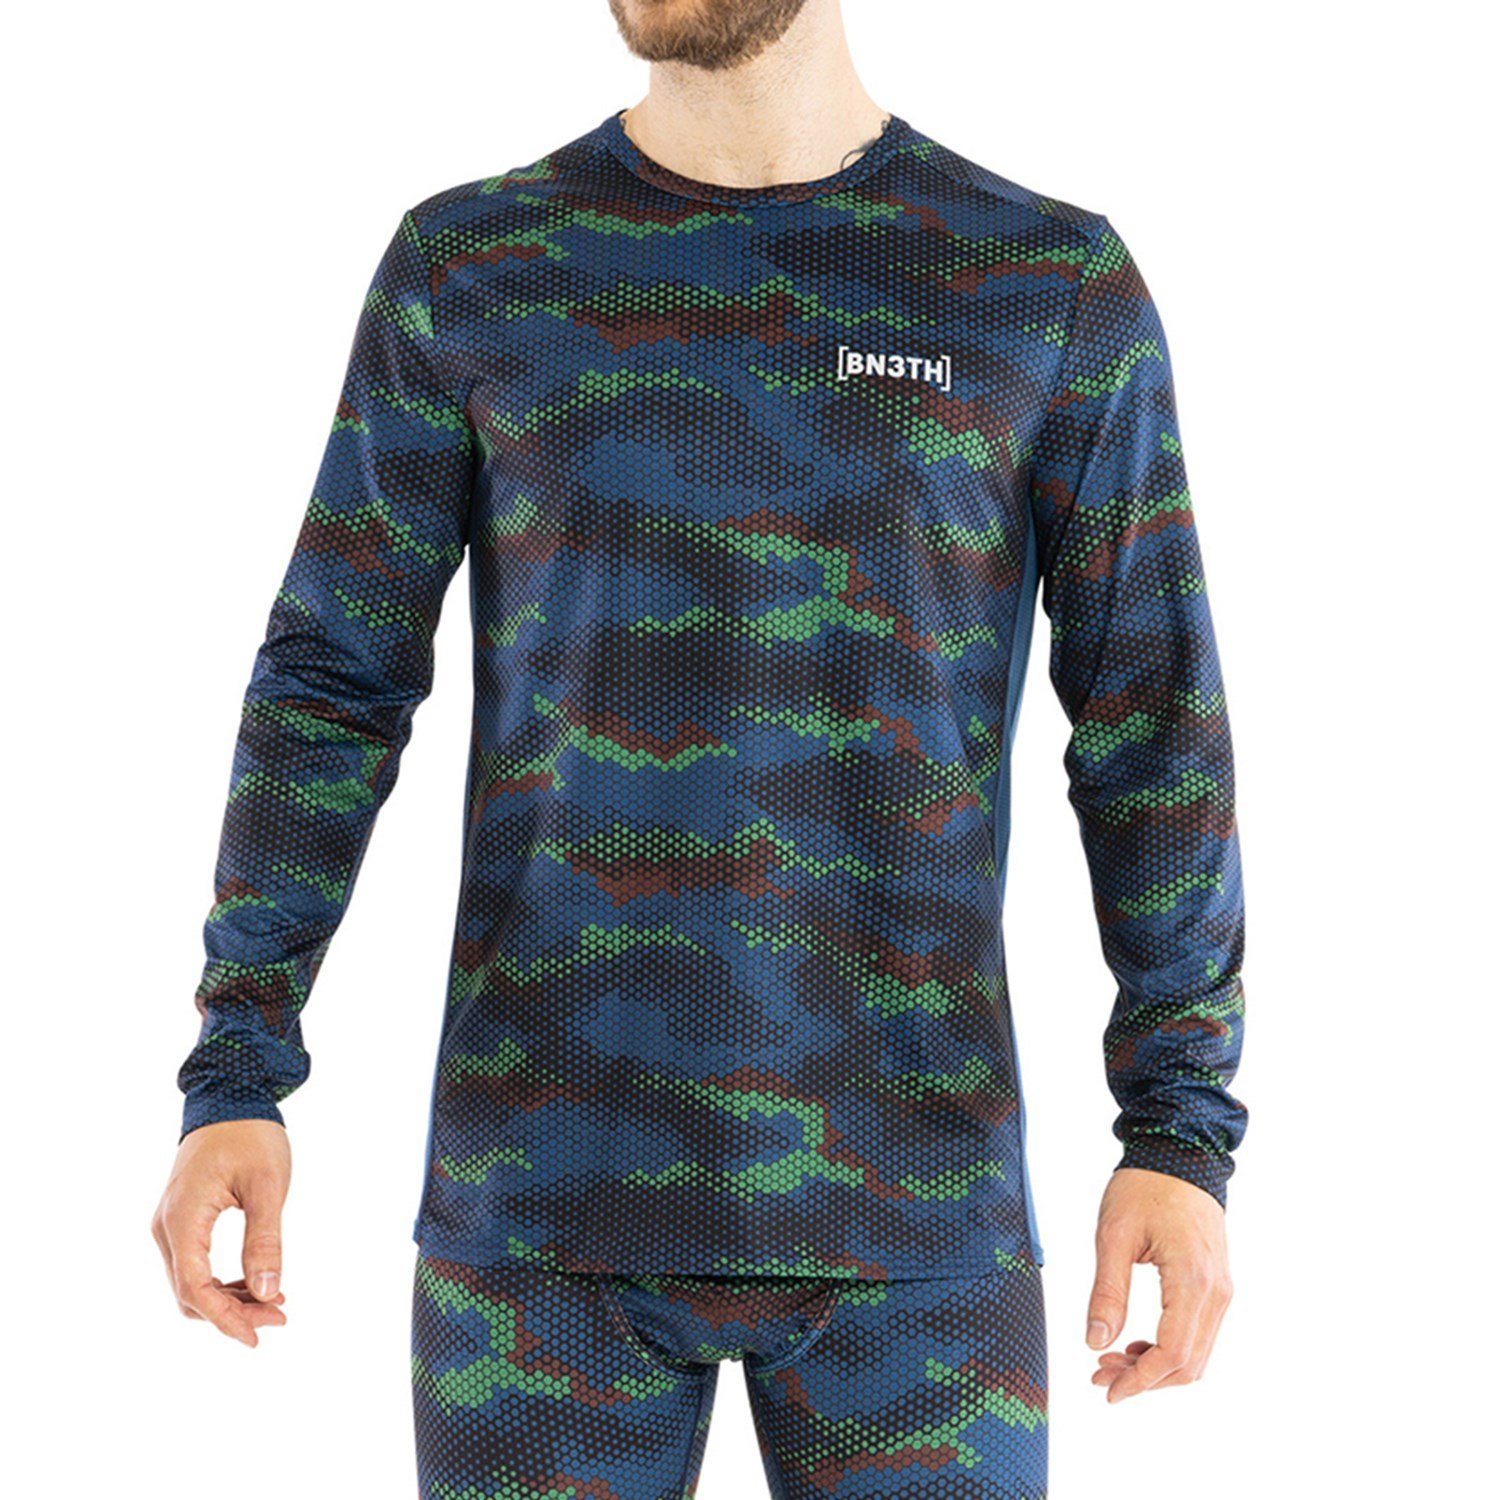 BN3TH Pro Iconic+ Long Sleeve Top - Men's